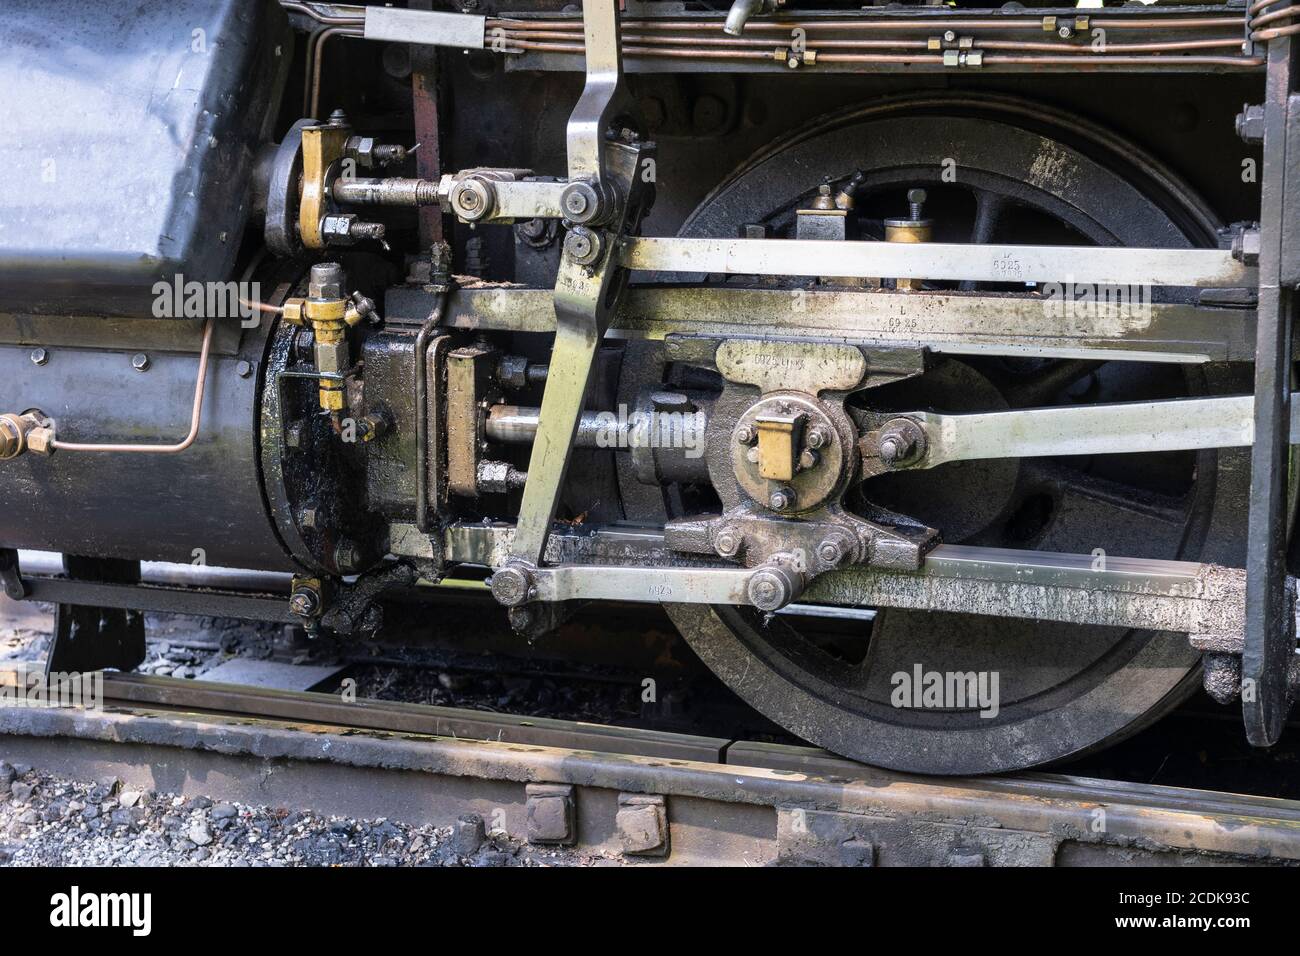 Closeup of a piston and valve gear for an old fashioned steam train from 1914 Klaus no. 6925 on the Steyr Valley Museum narrow gauge railway, Austria Stock Photo